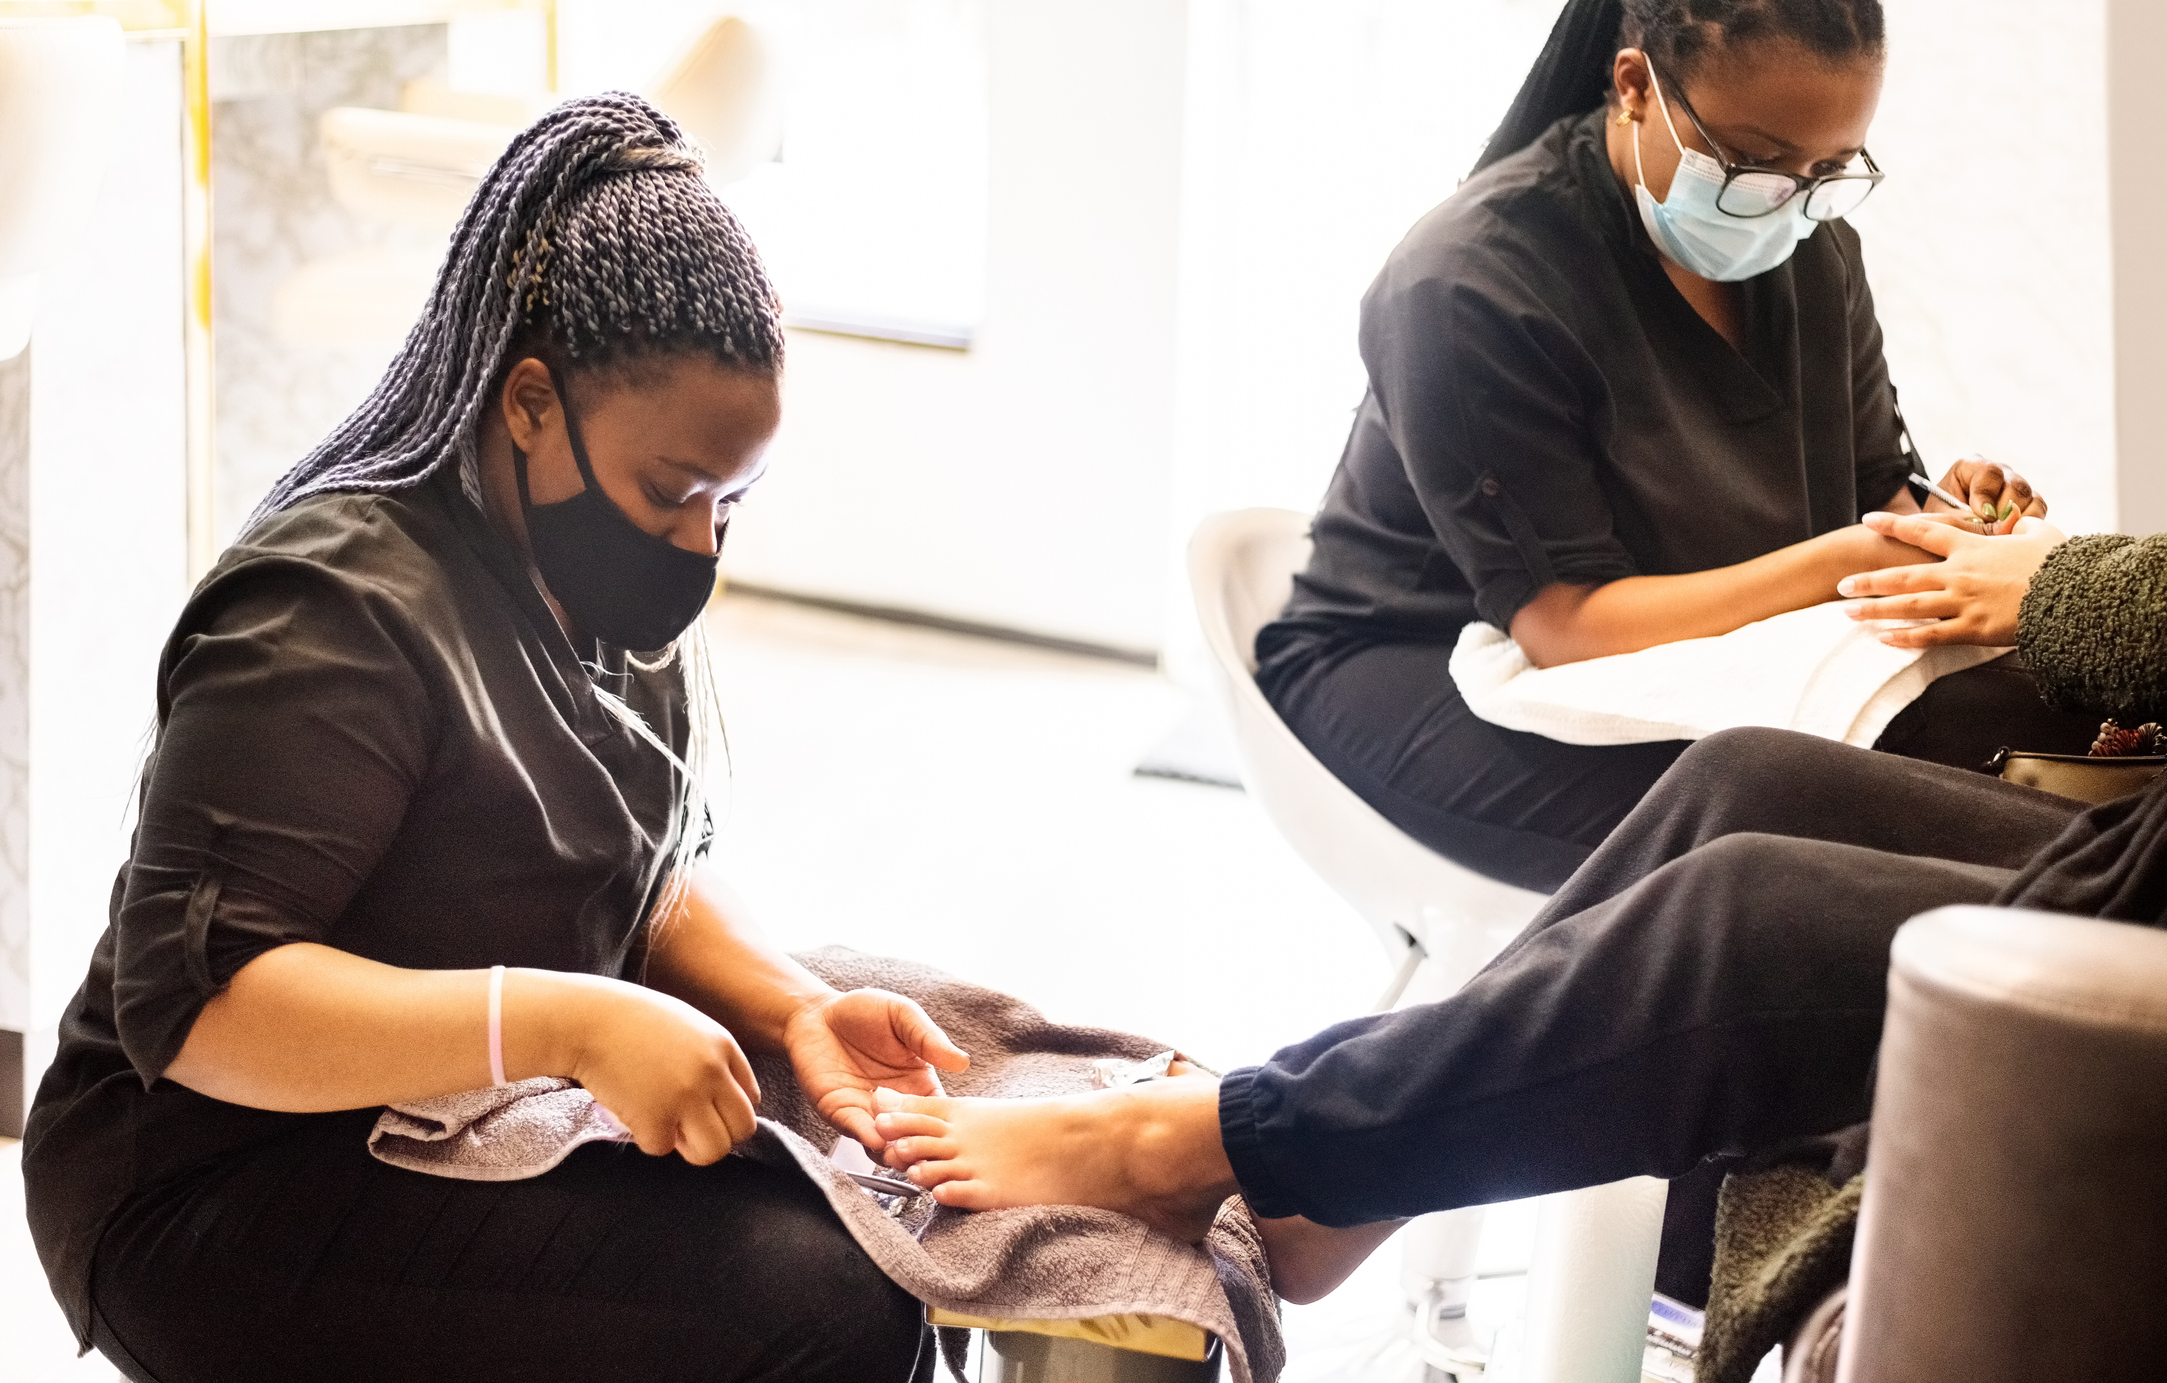 Woman having pedicure and manicure at beauty spa during pandemic